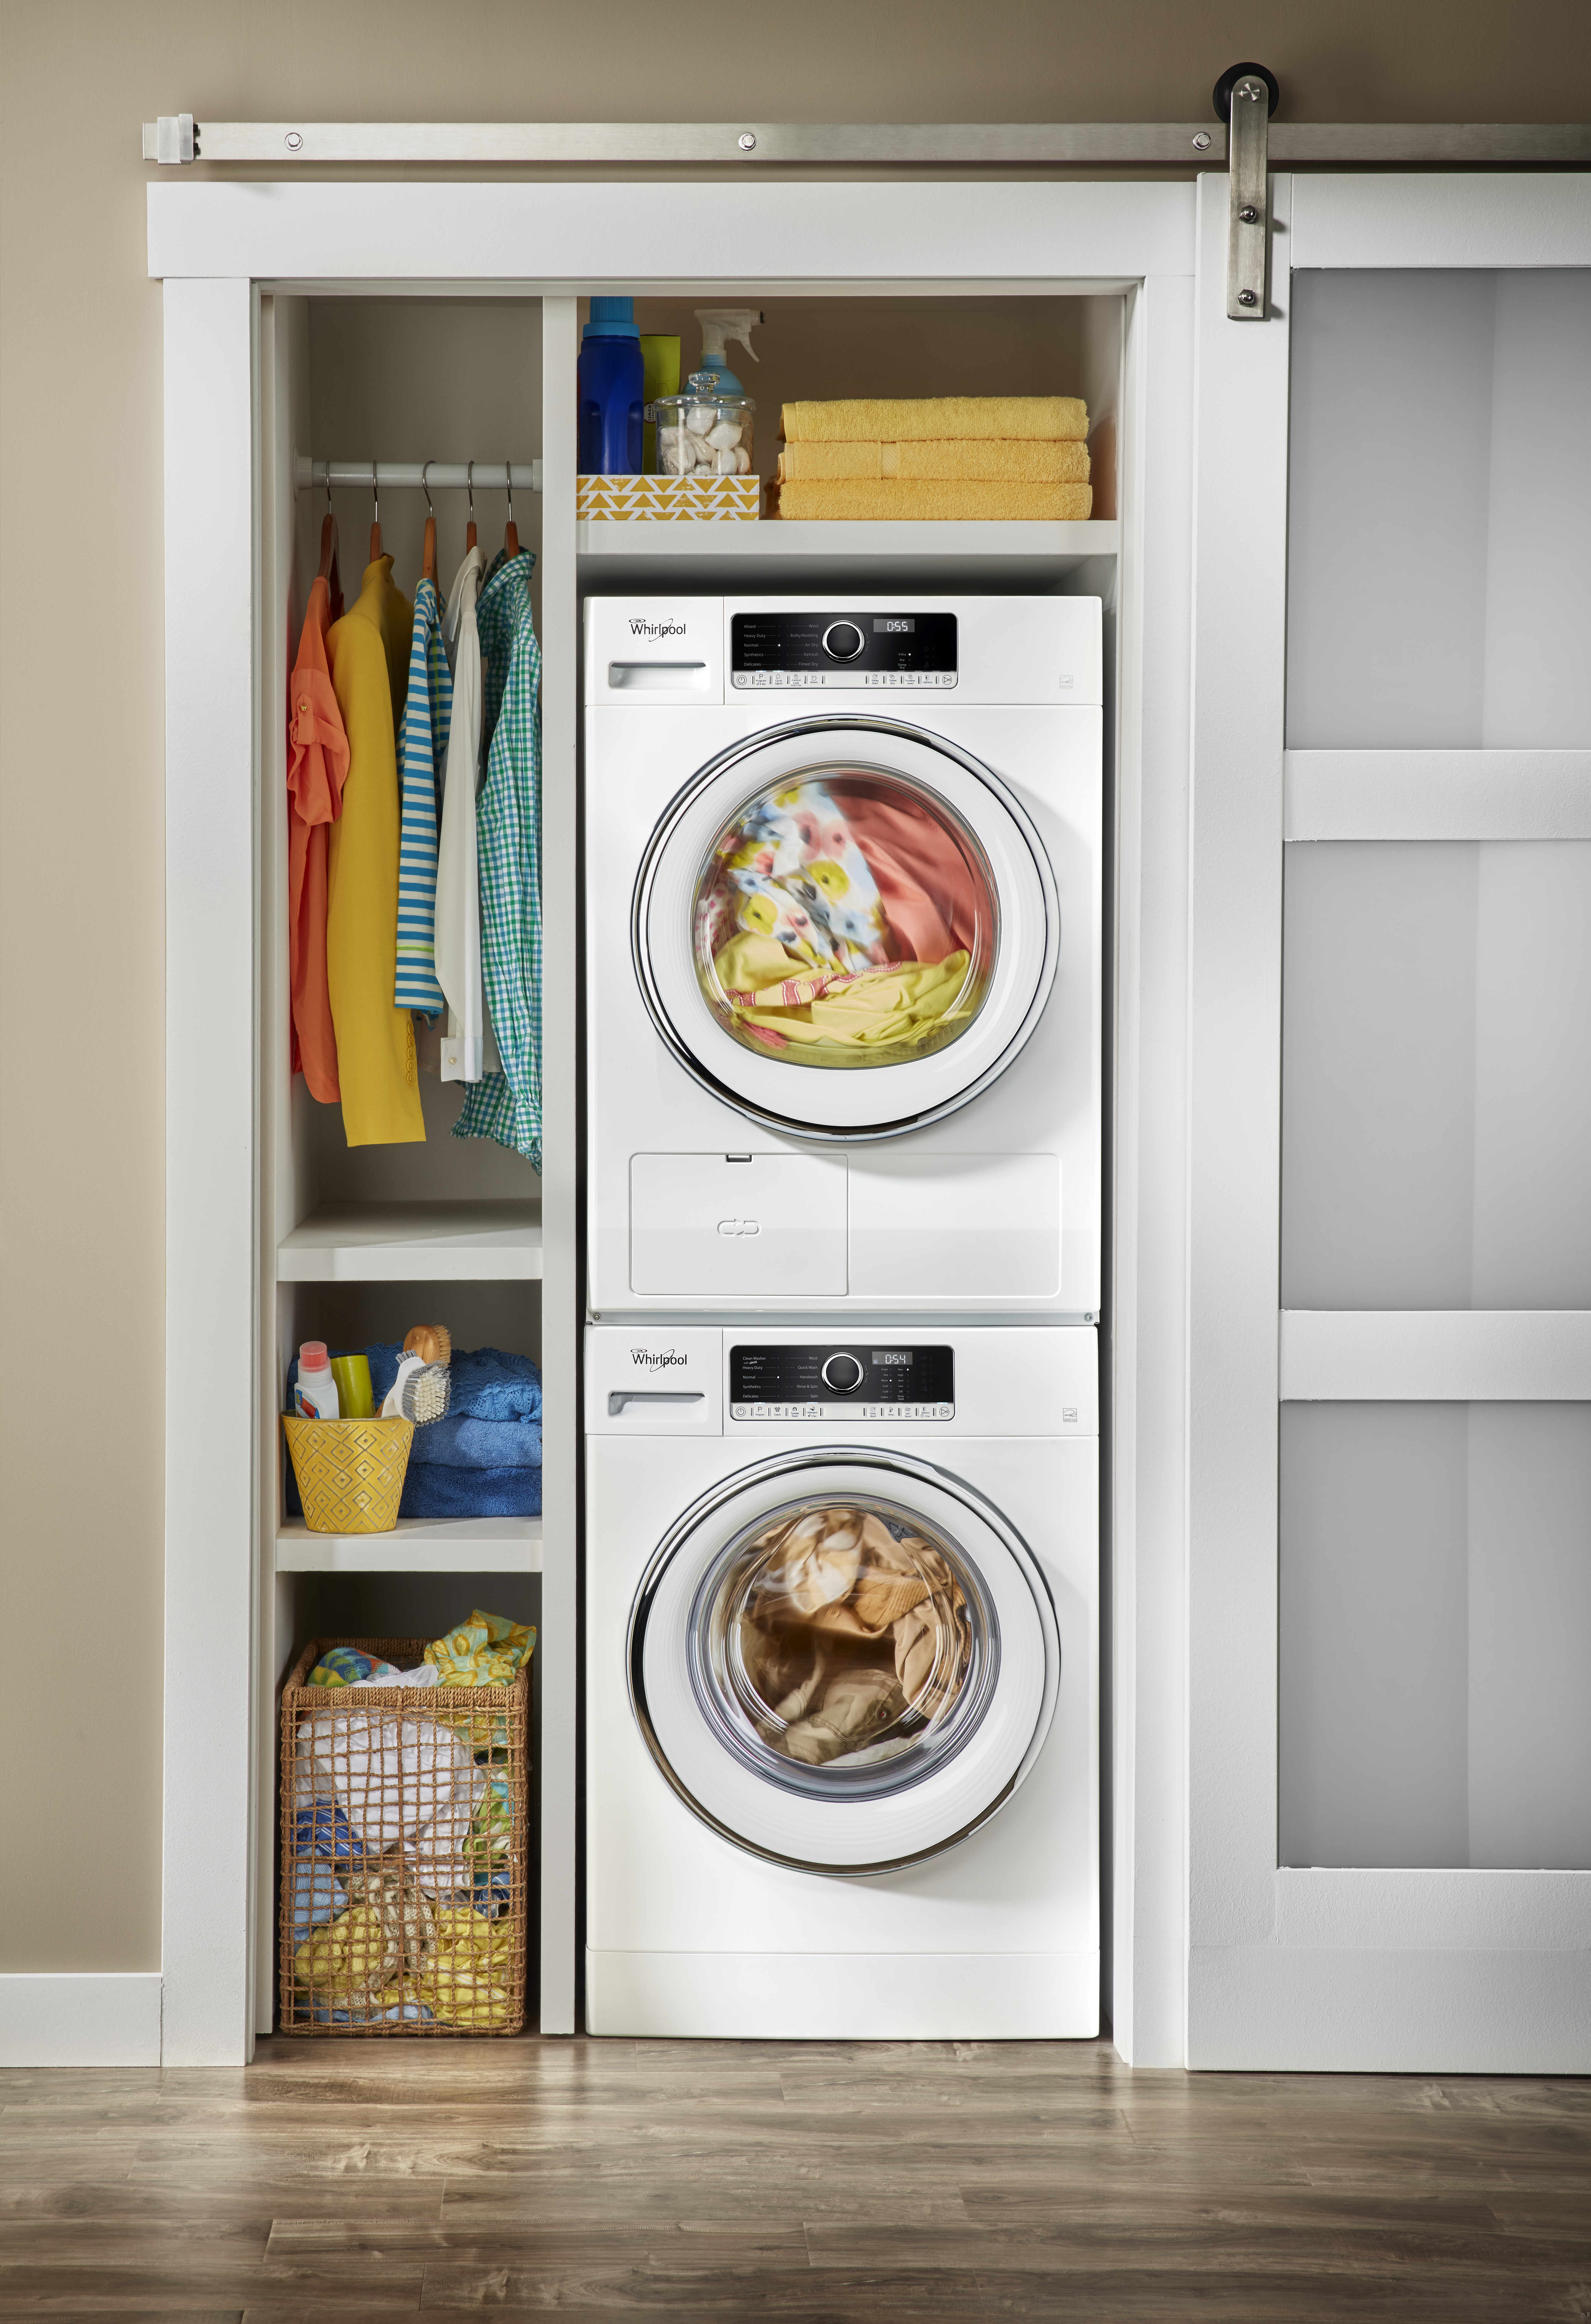 Whirlpool WPWADRE702 Stacked Washer & Dryer Set with Front Load Washer and Electric Dryer in White